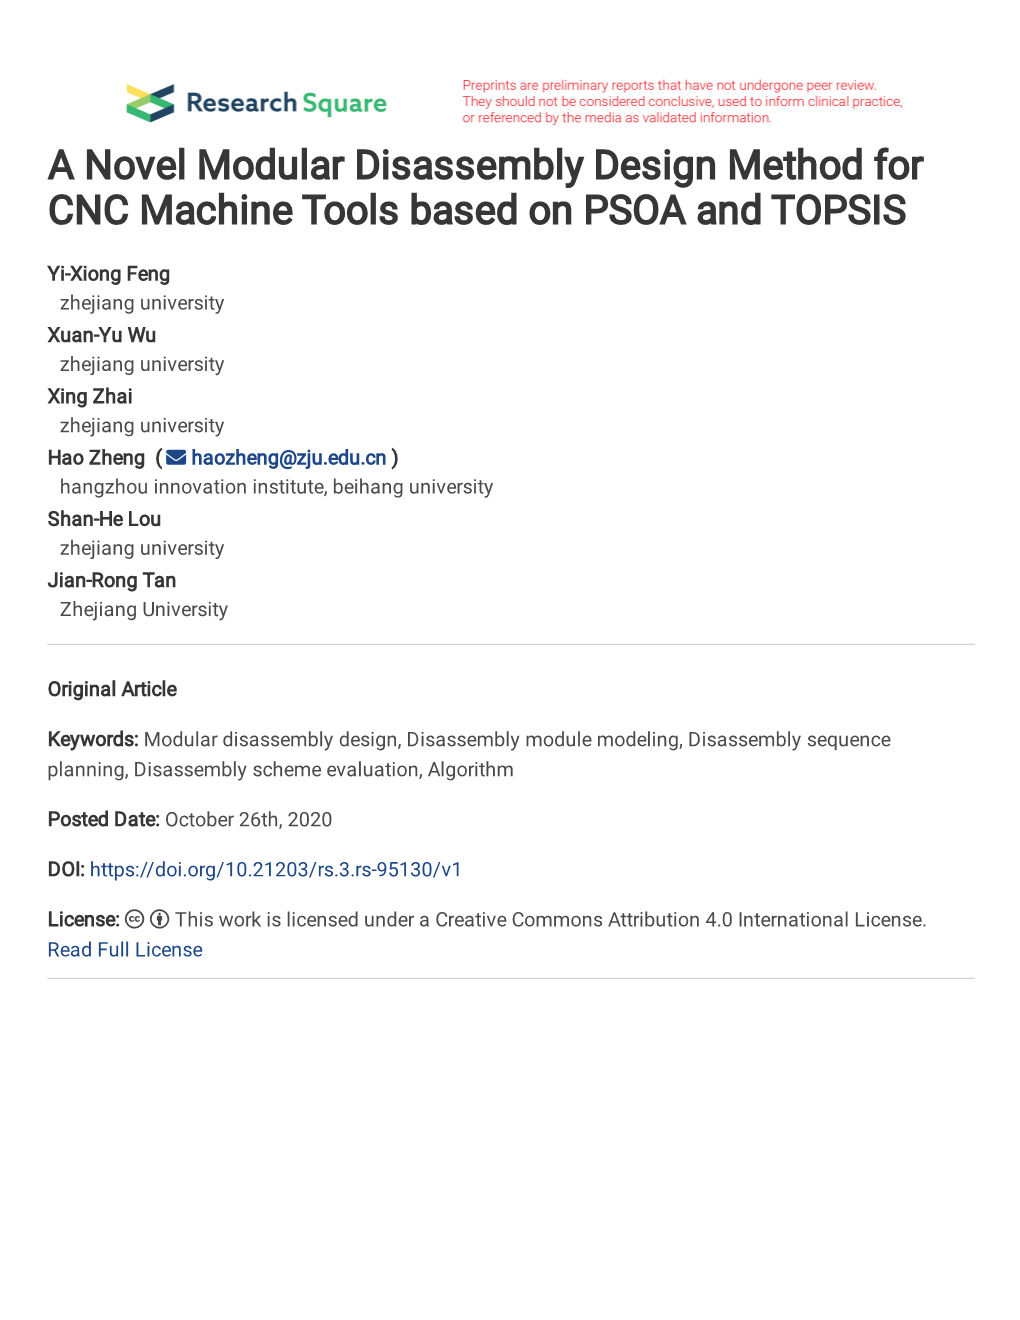 A Novel Modular Disassembly Design Method for CNC Machine Tools Based on PSOA and TOPSIS